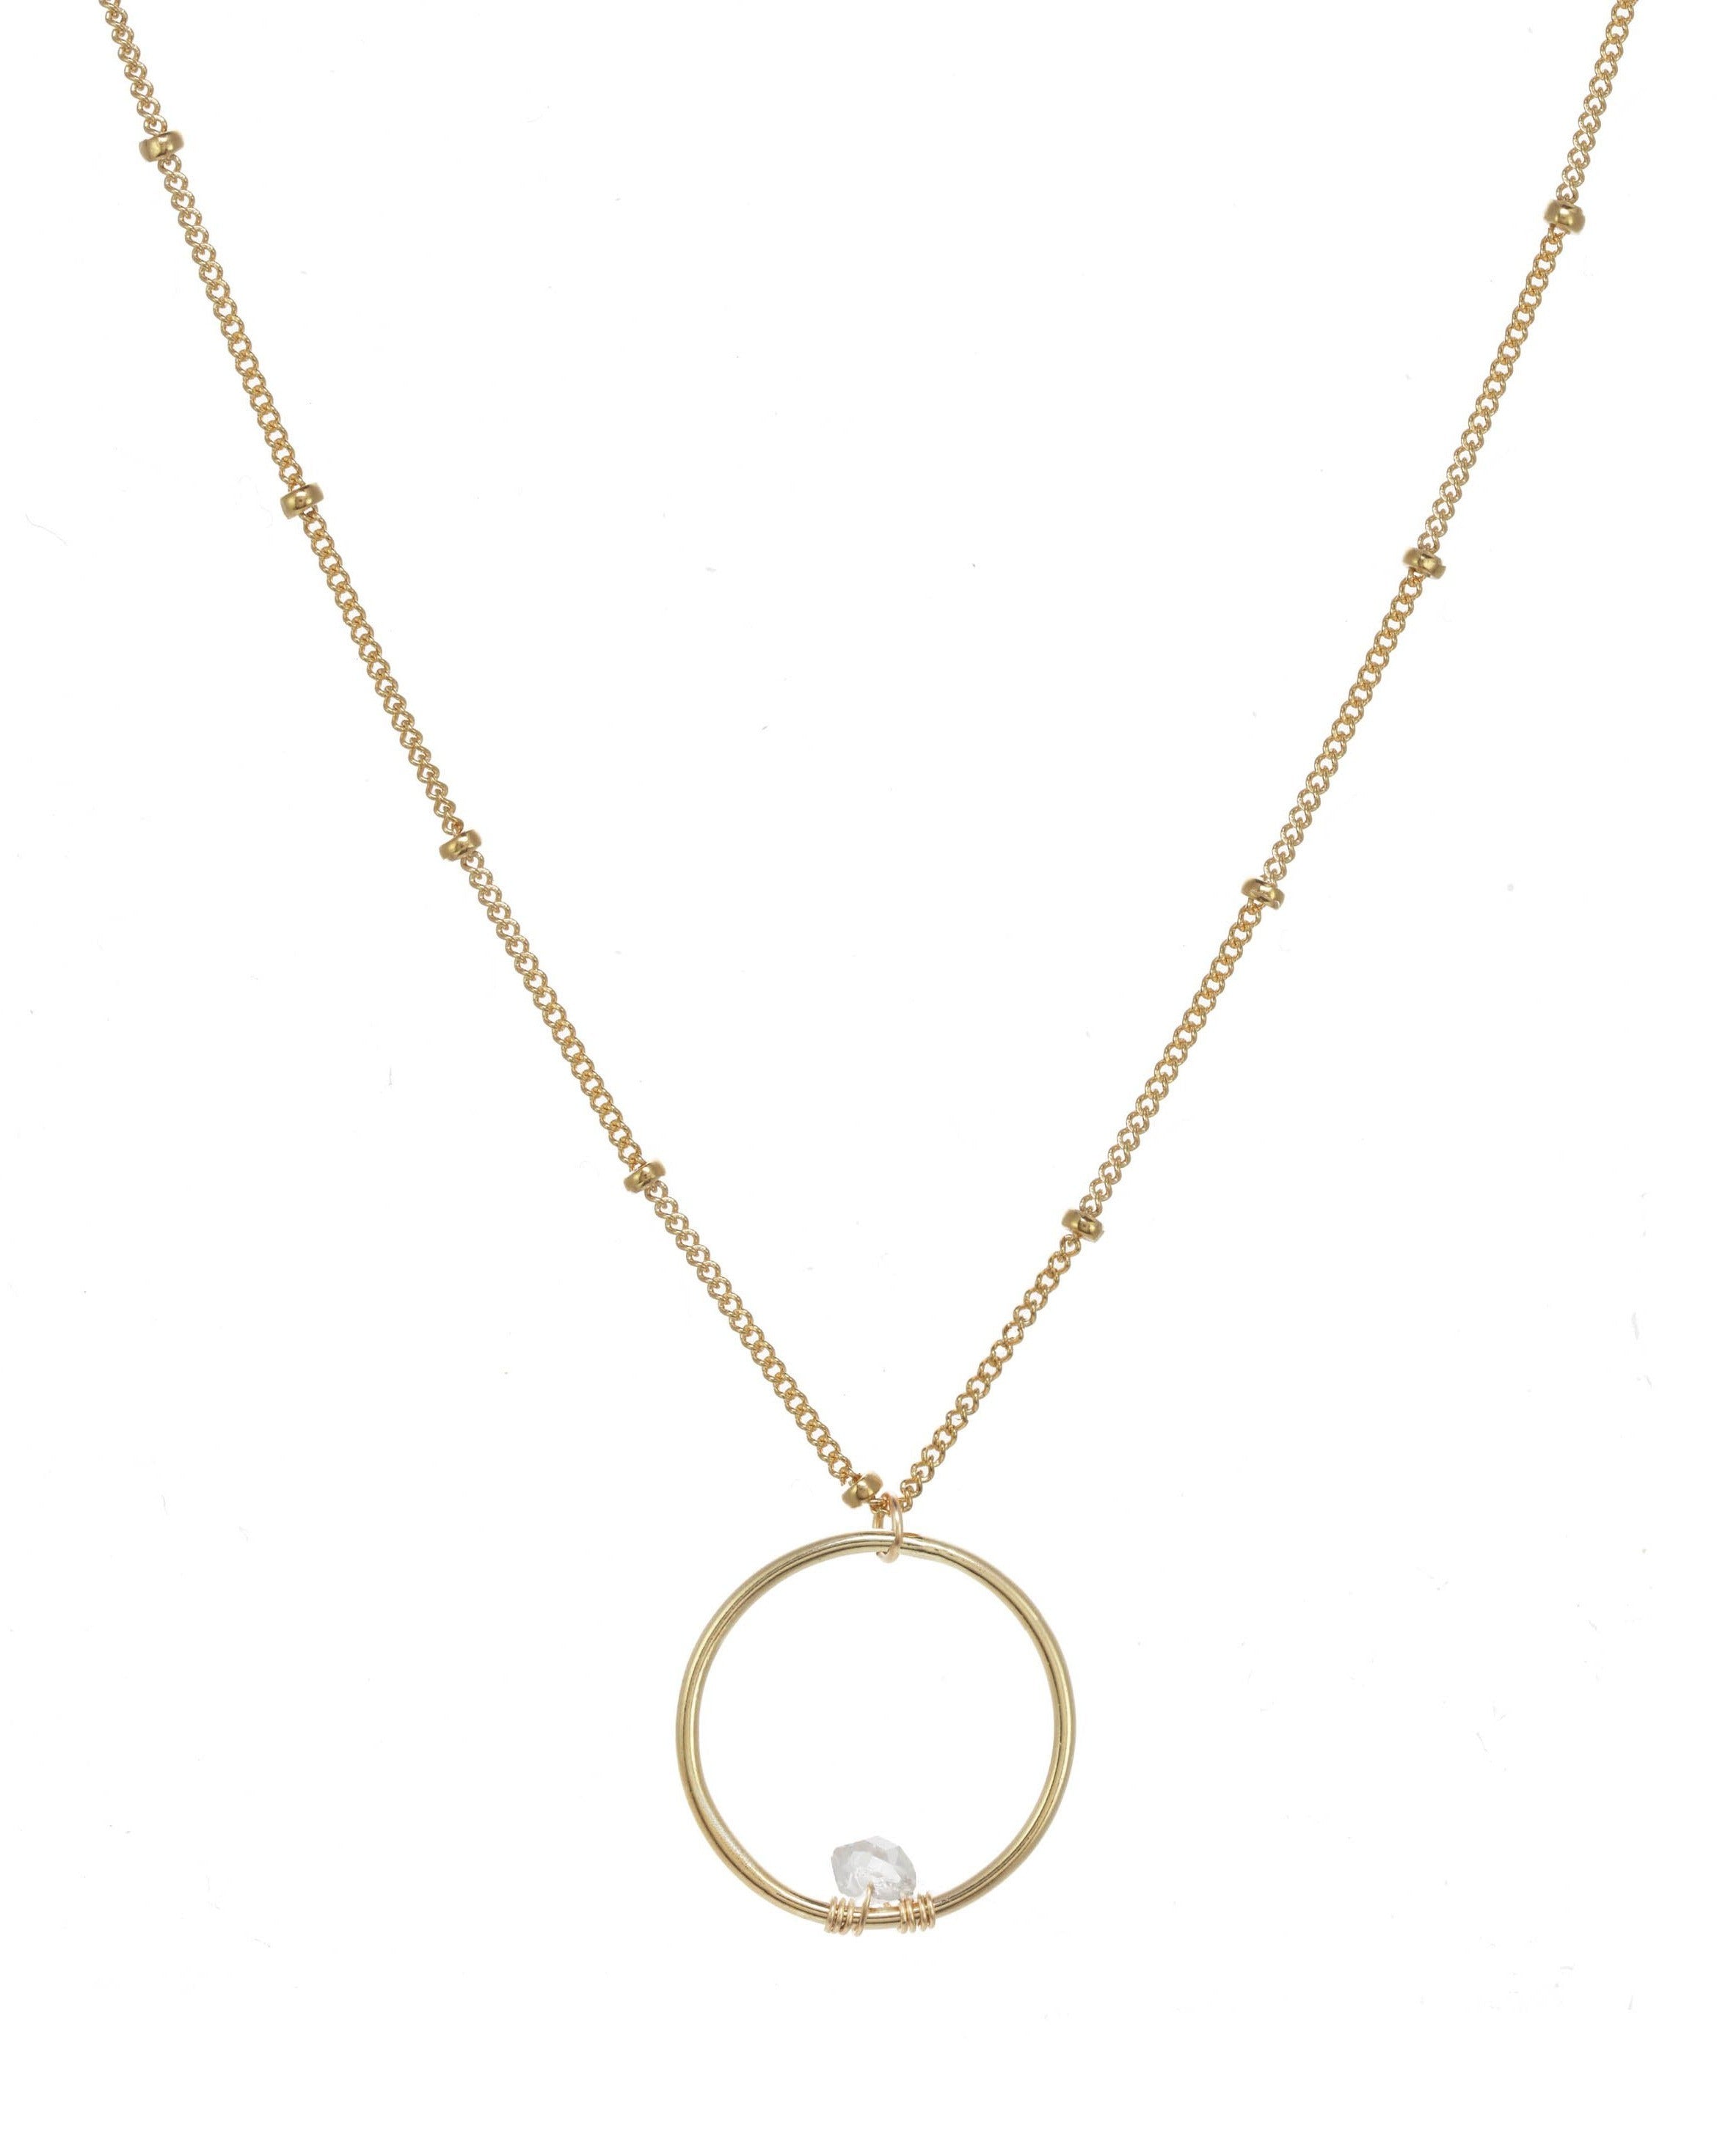 Balan Necklace by KOZAKH. A 16 to 18 inch adjustable length necklace in 14K Gold Filled, featuring a ring with a 3-4mm Herkimer Diamond.